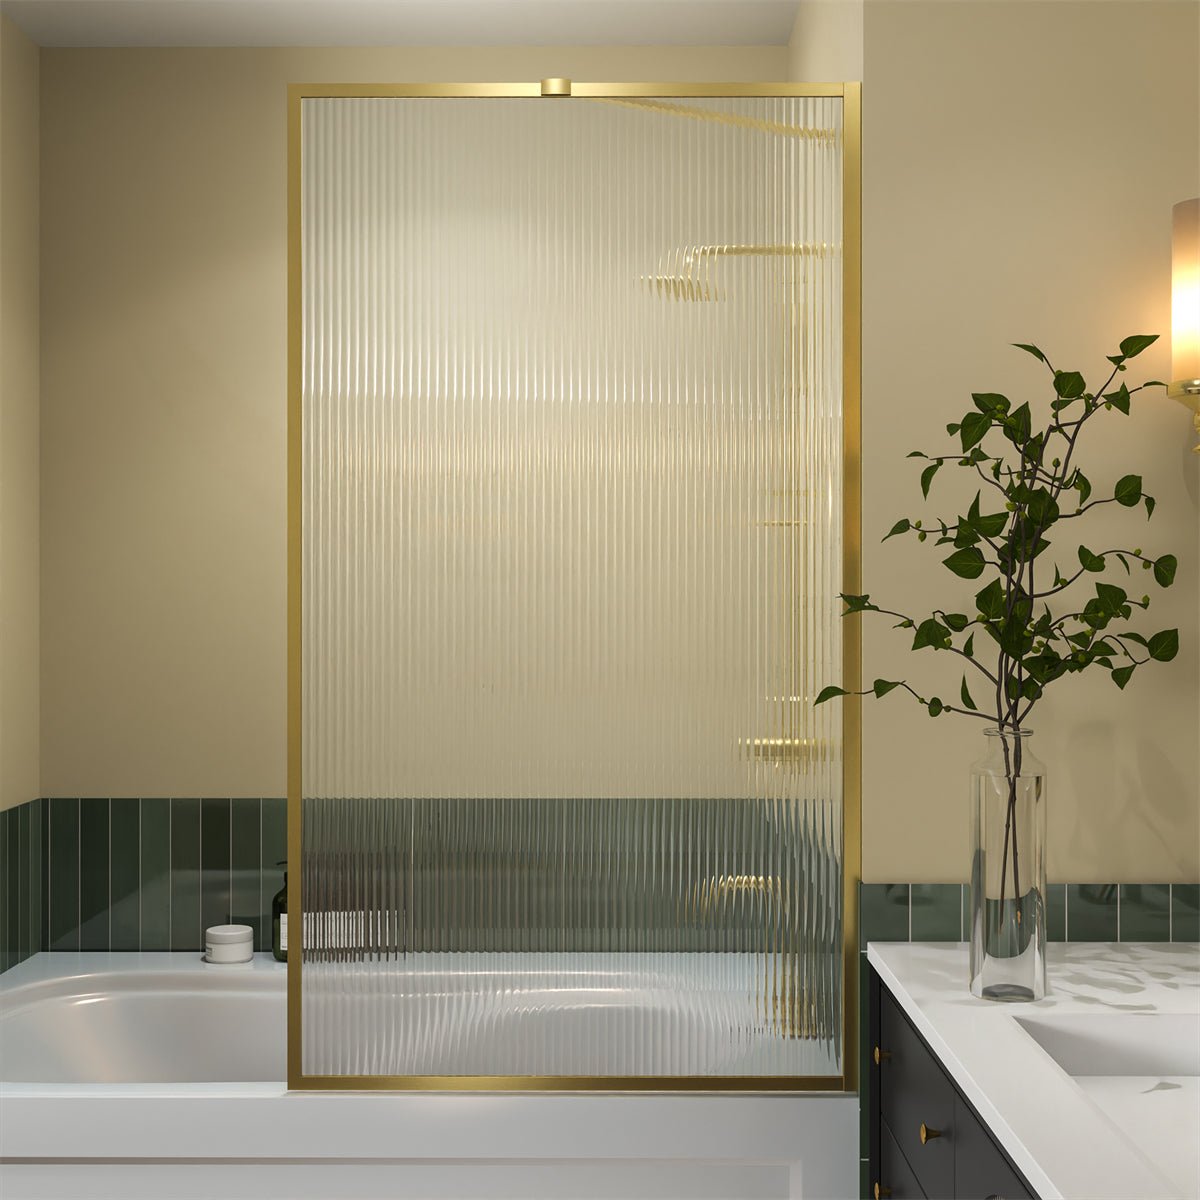 Serenity 33" x 58" Bathtub Screen Reeded Glass Shower Panel For Bathtub,Brushed Gold Finish,Reversible Installation,Square